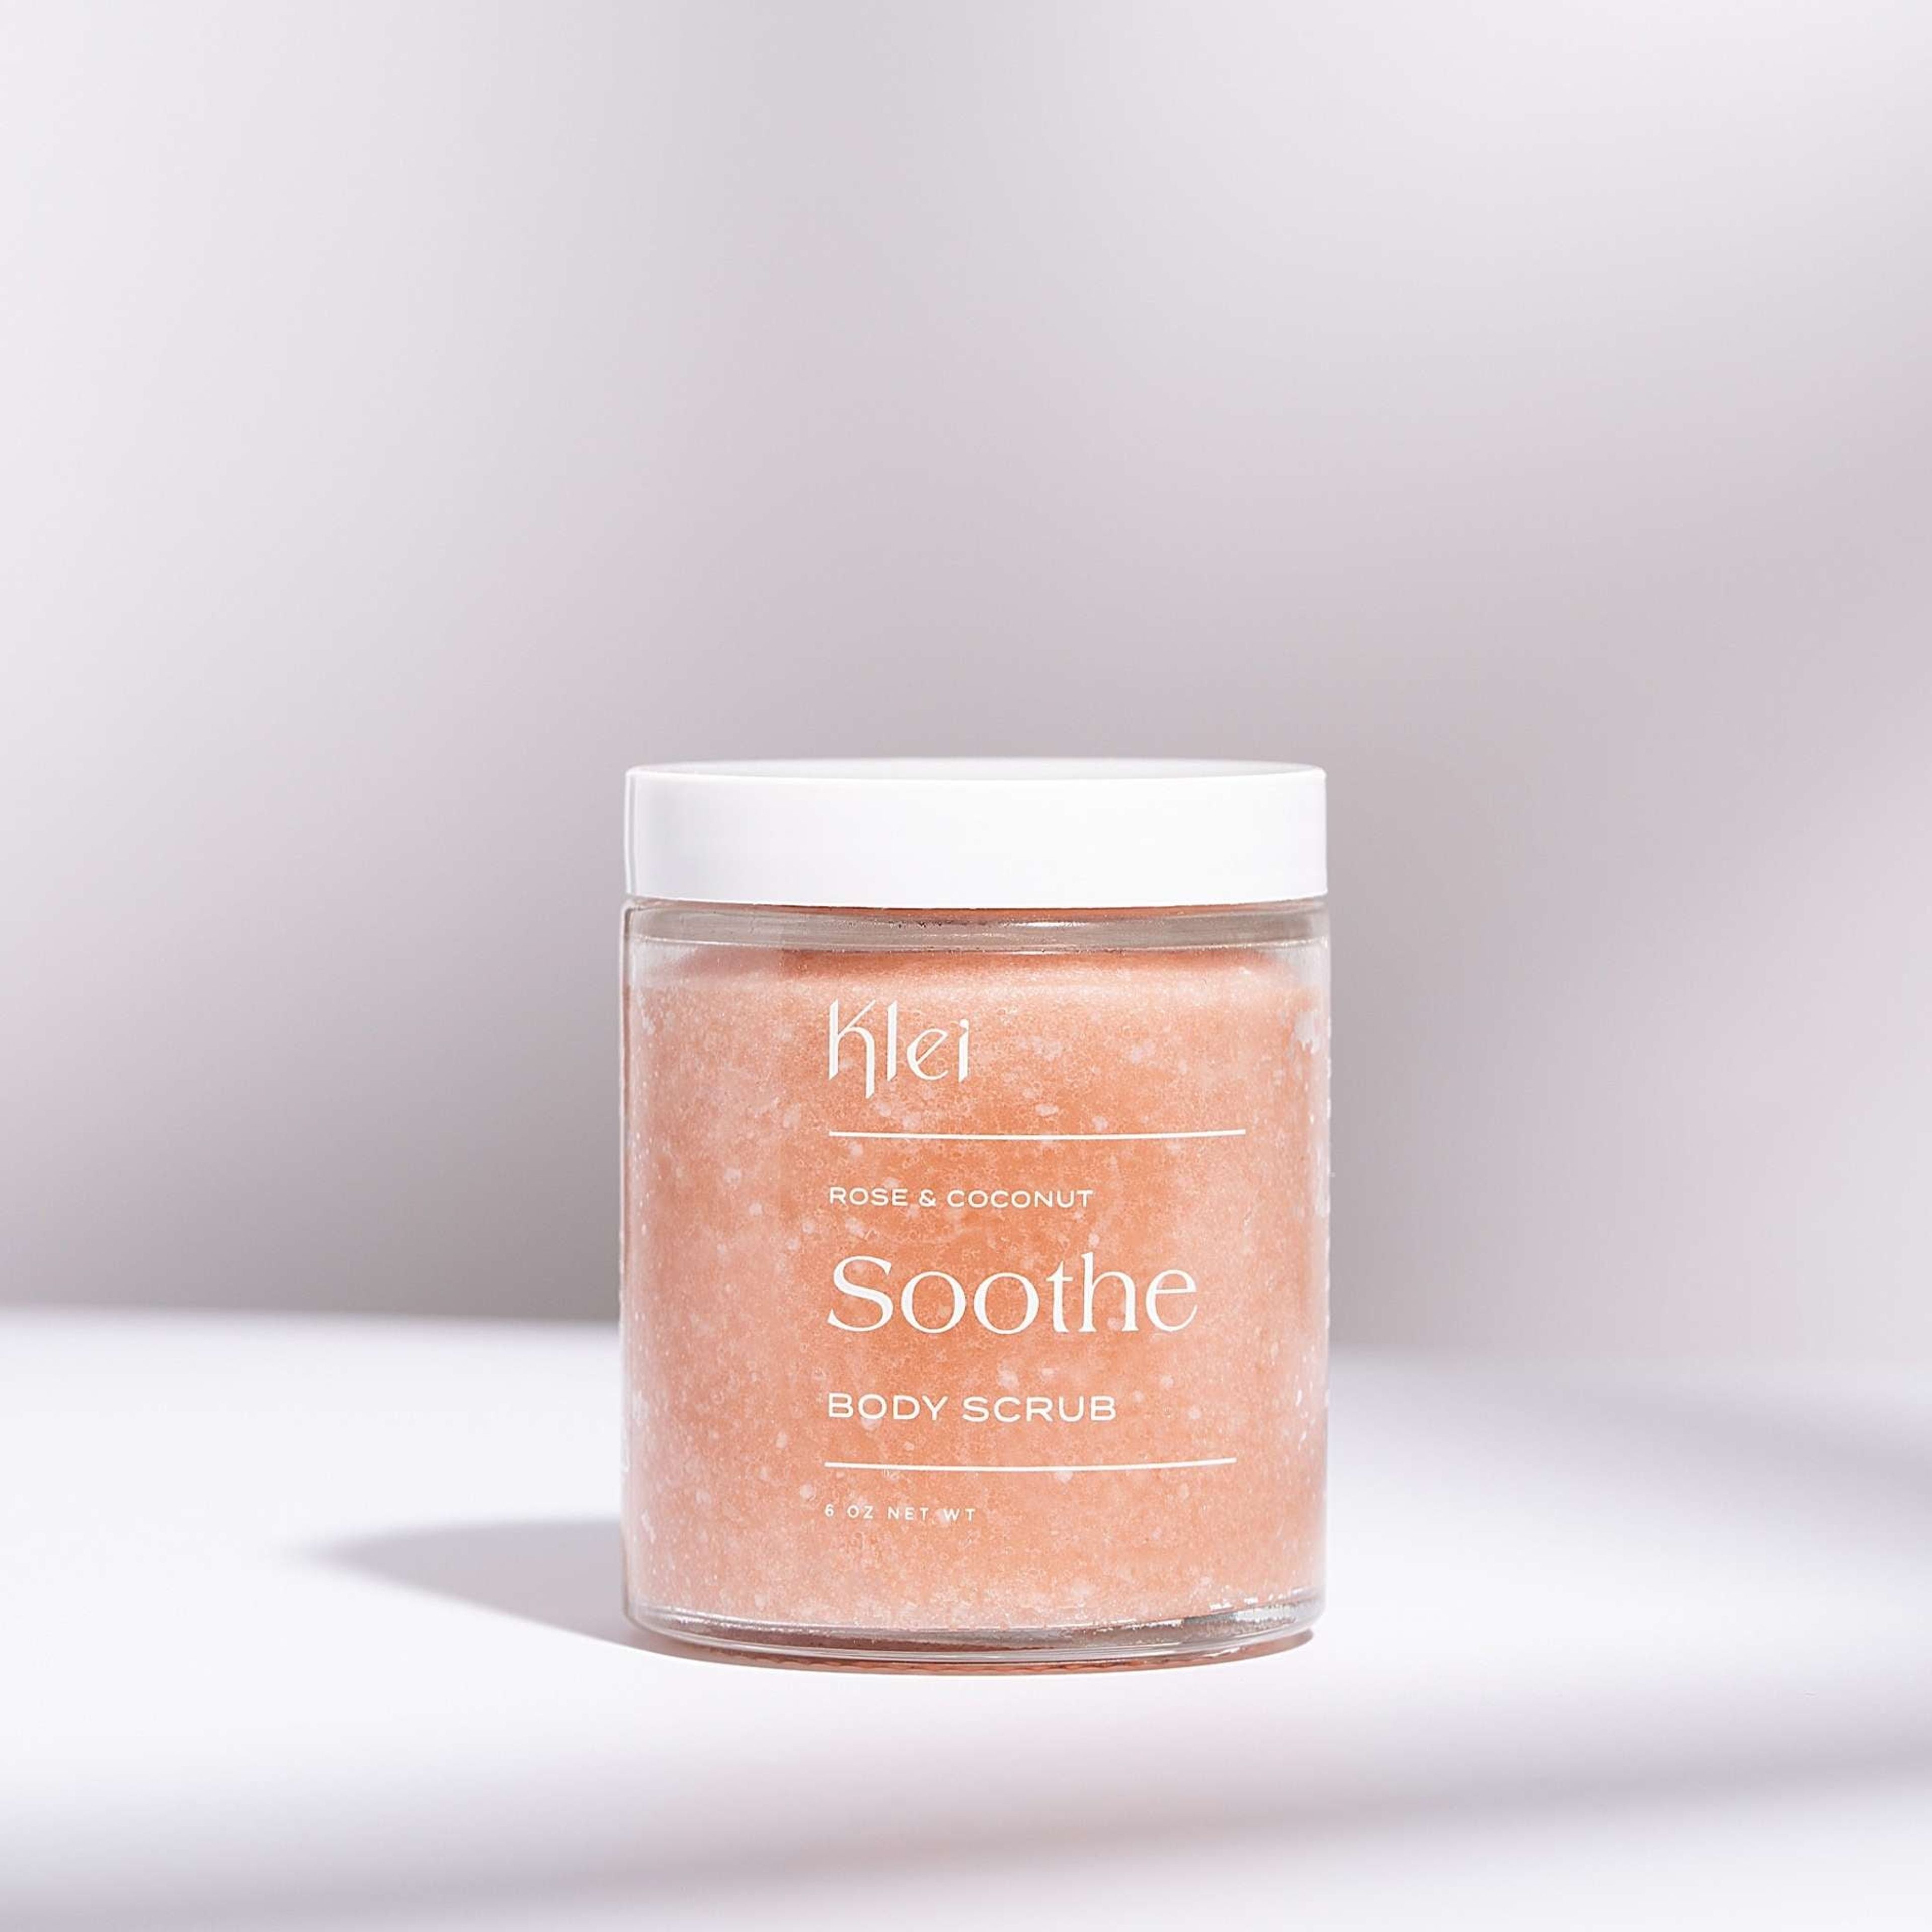 Soothe Rose & Coconut Body Scrub